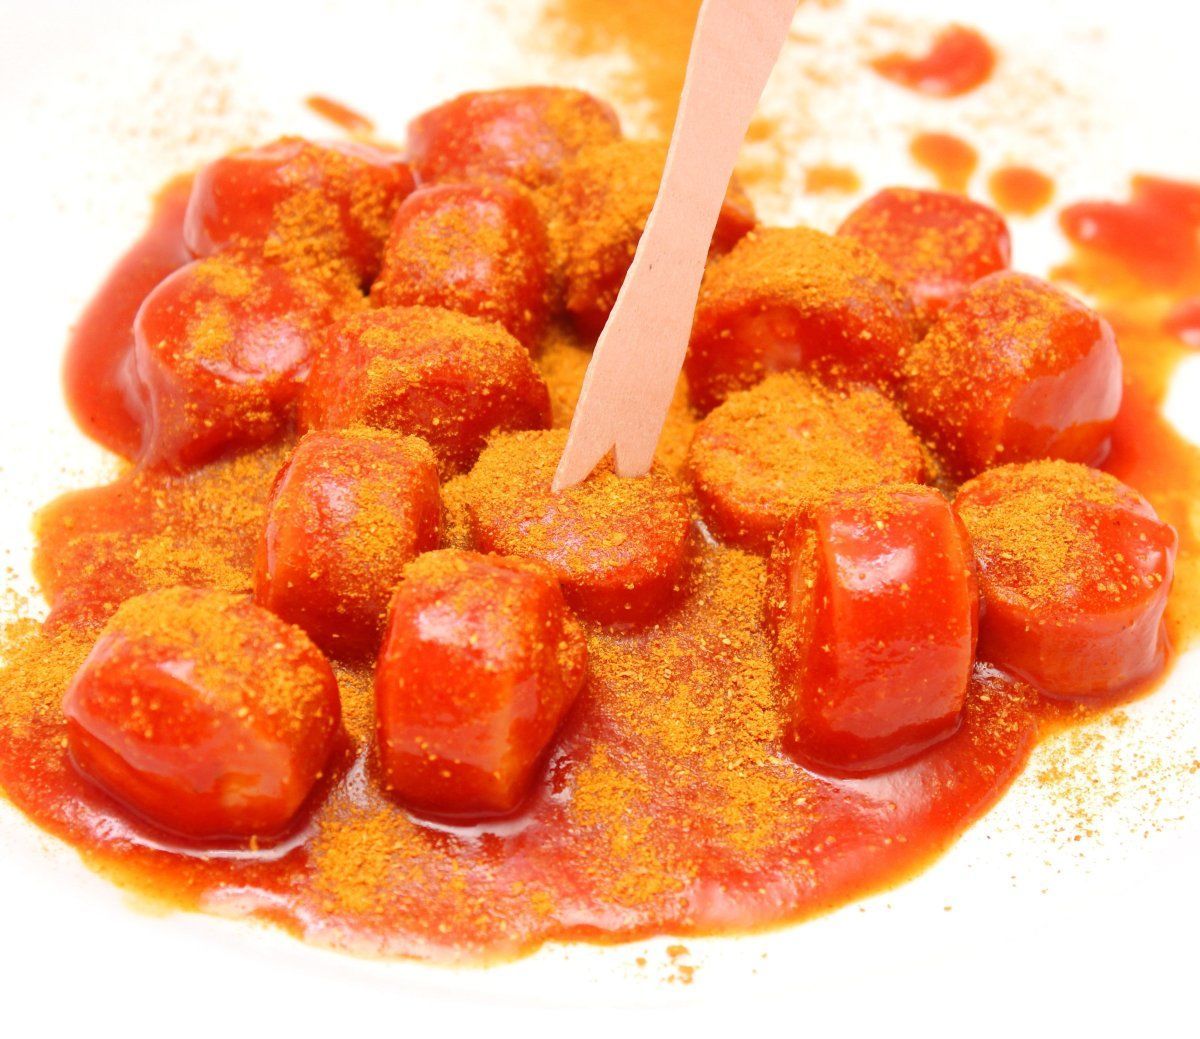 Interesting facts about Germany, currywurst